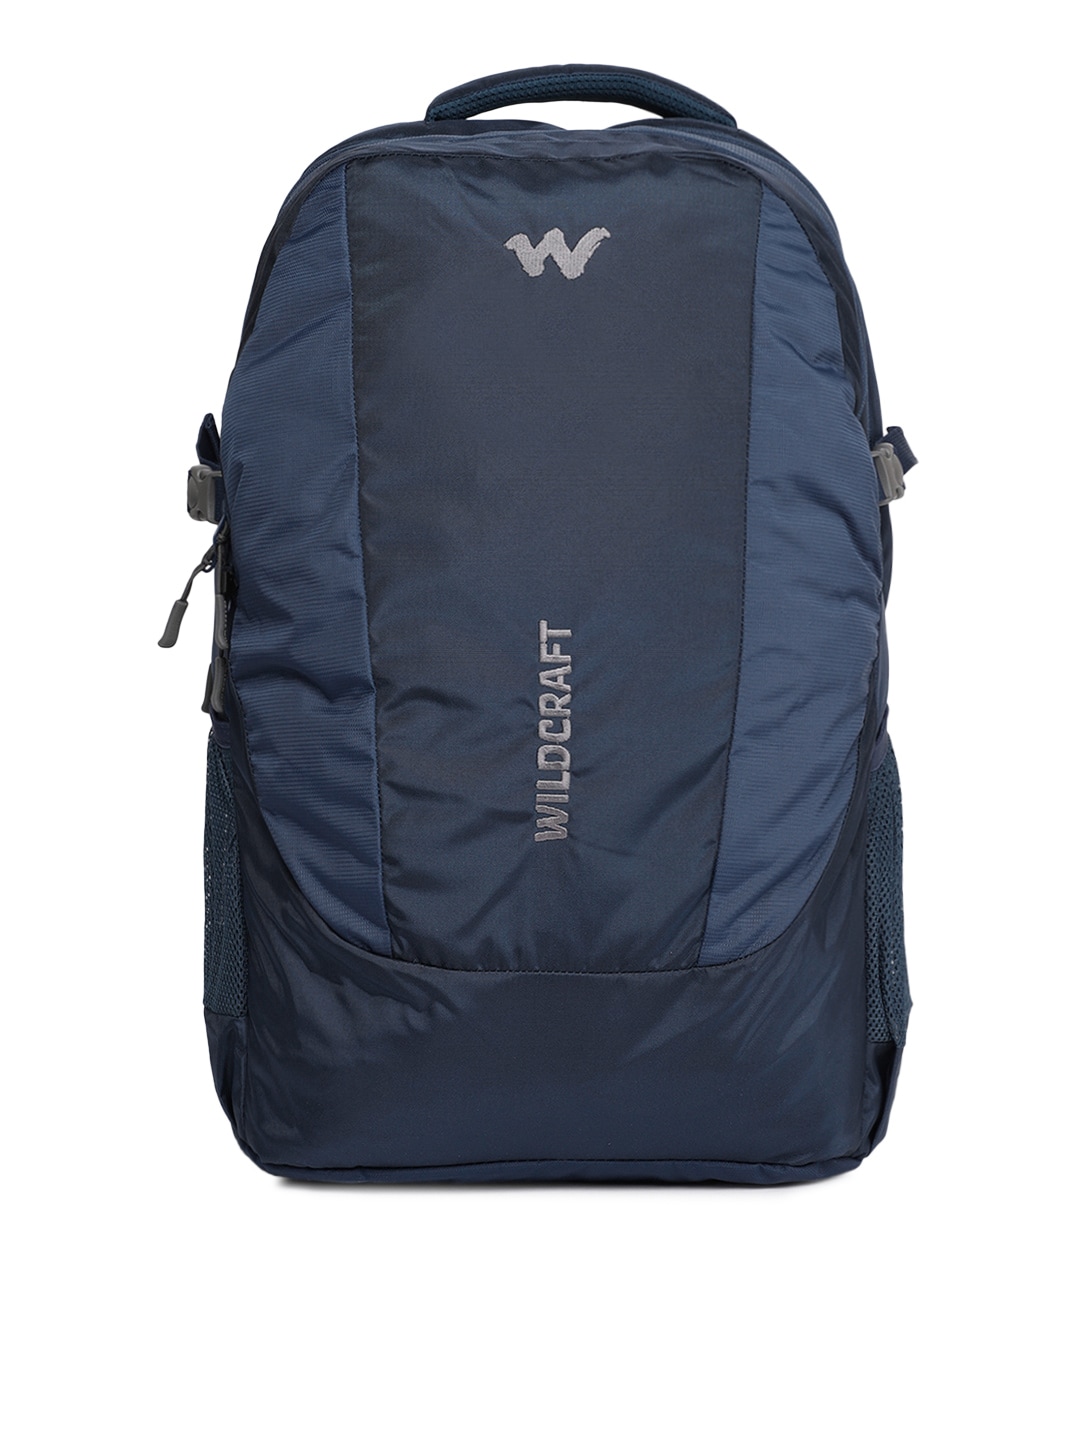 Wildcraft Unisex Blue Trident XL 2 Backpack Price in India